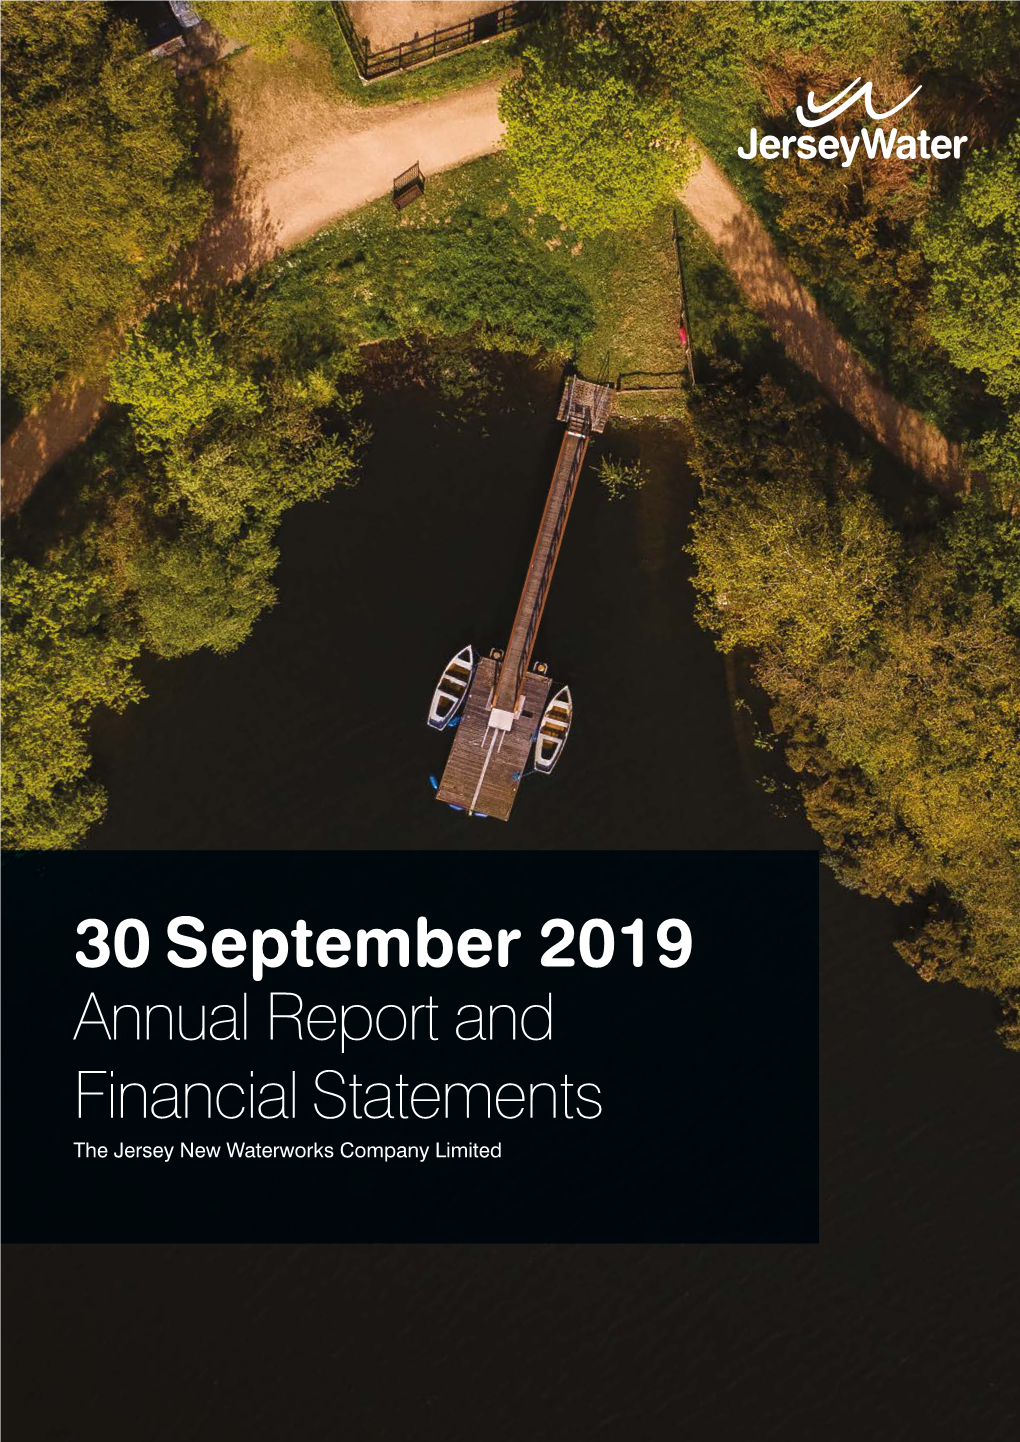 30 September 2019 Annual Report and Financial Statements the Jersey New Waterworks Company Limited